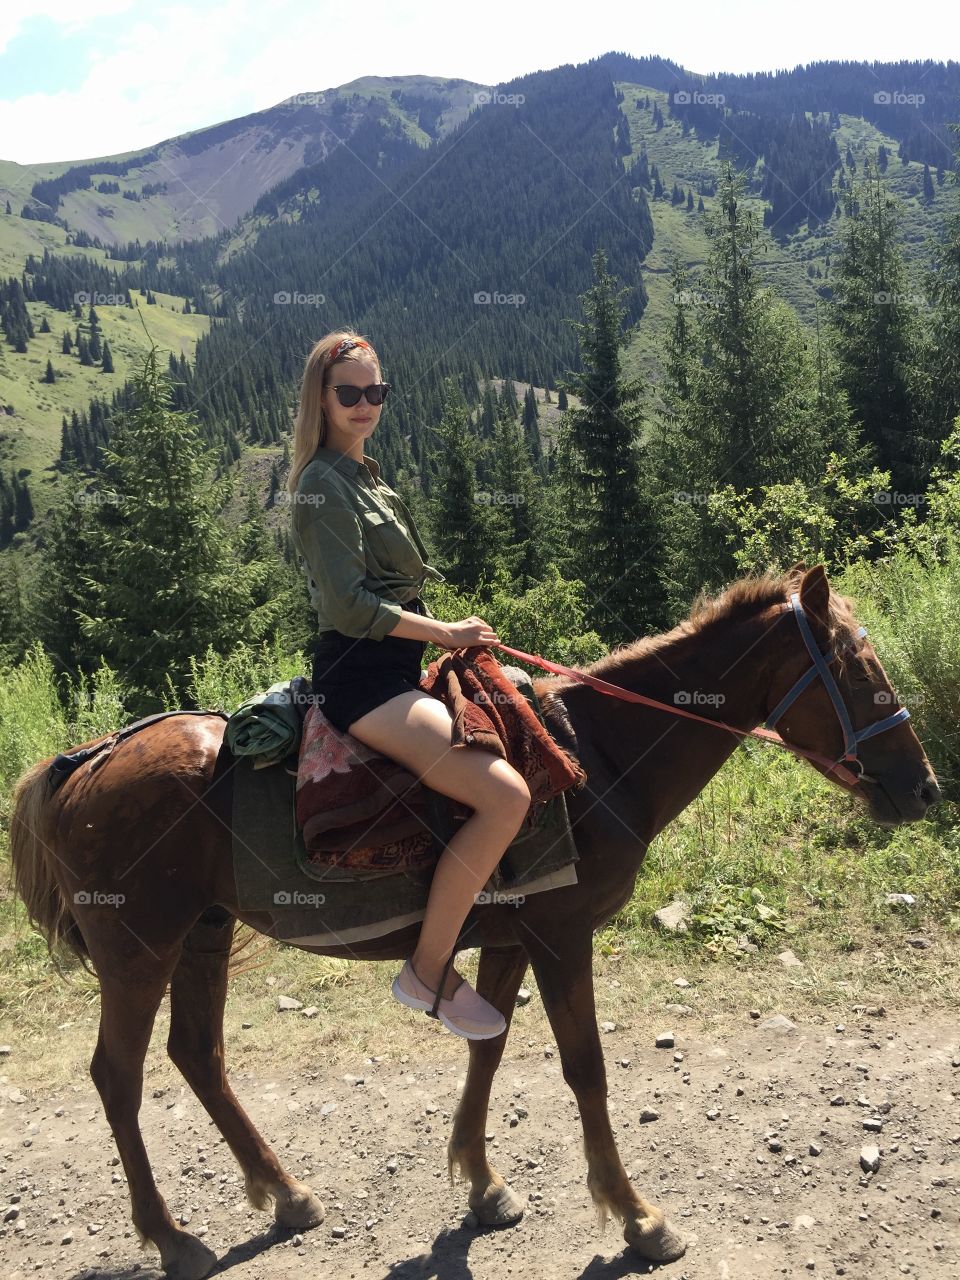 beautiful, slender, brave girl in dark sunglasses, European appearance on horseback conquers the mountains